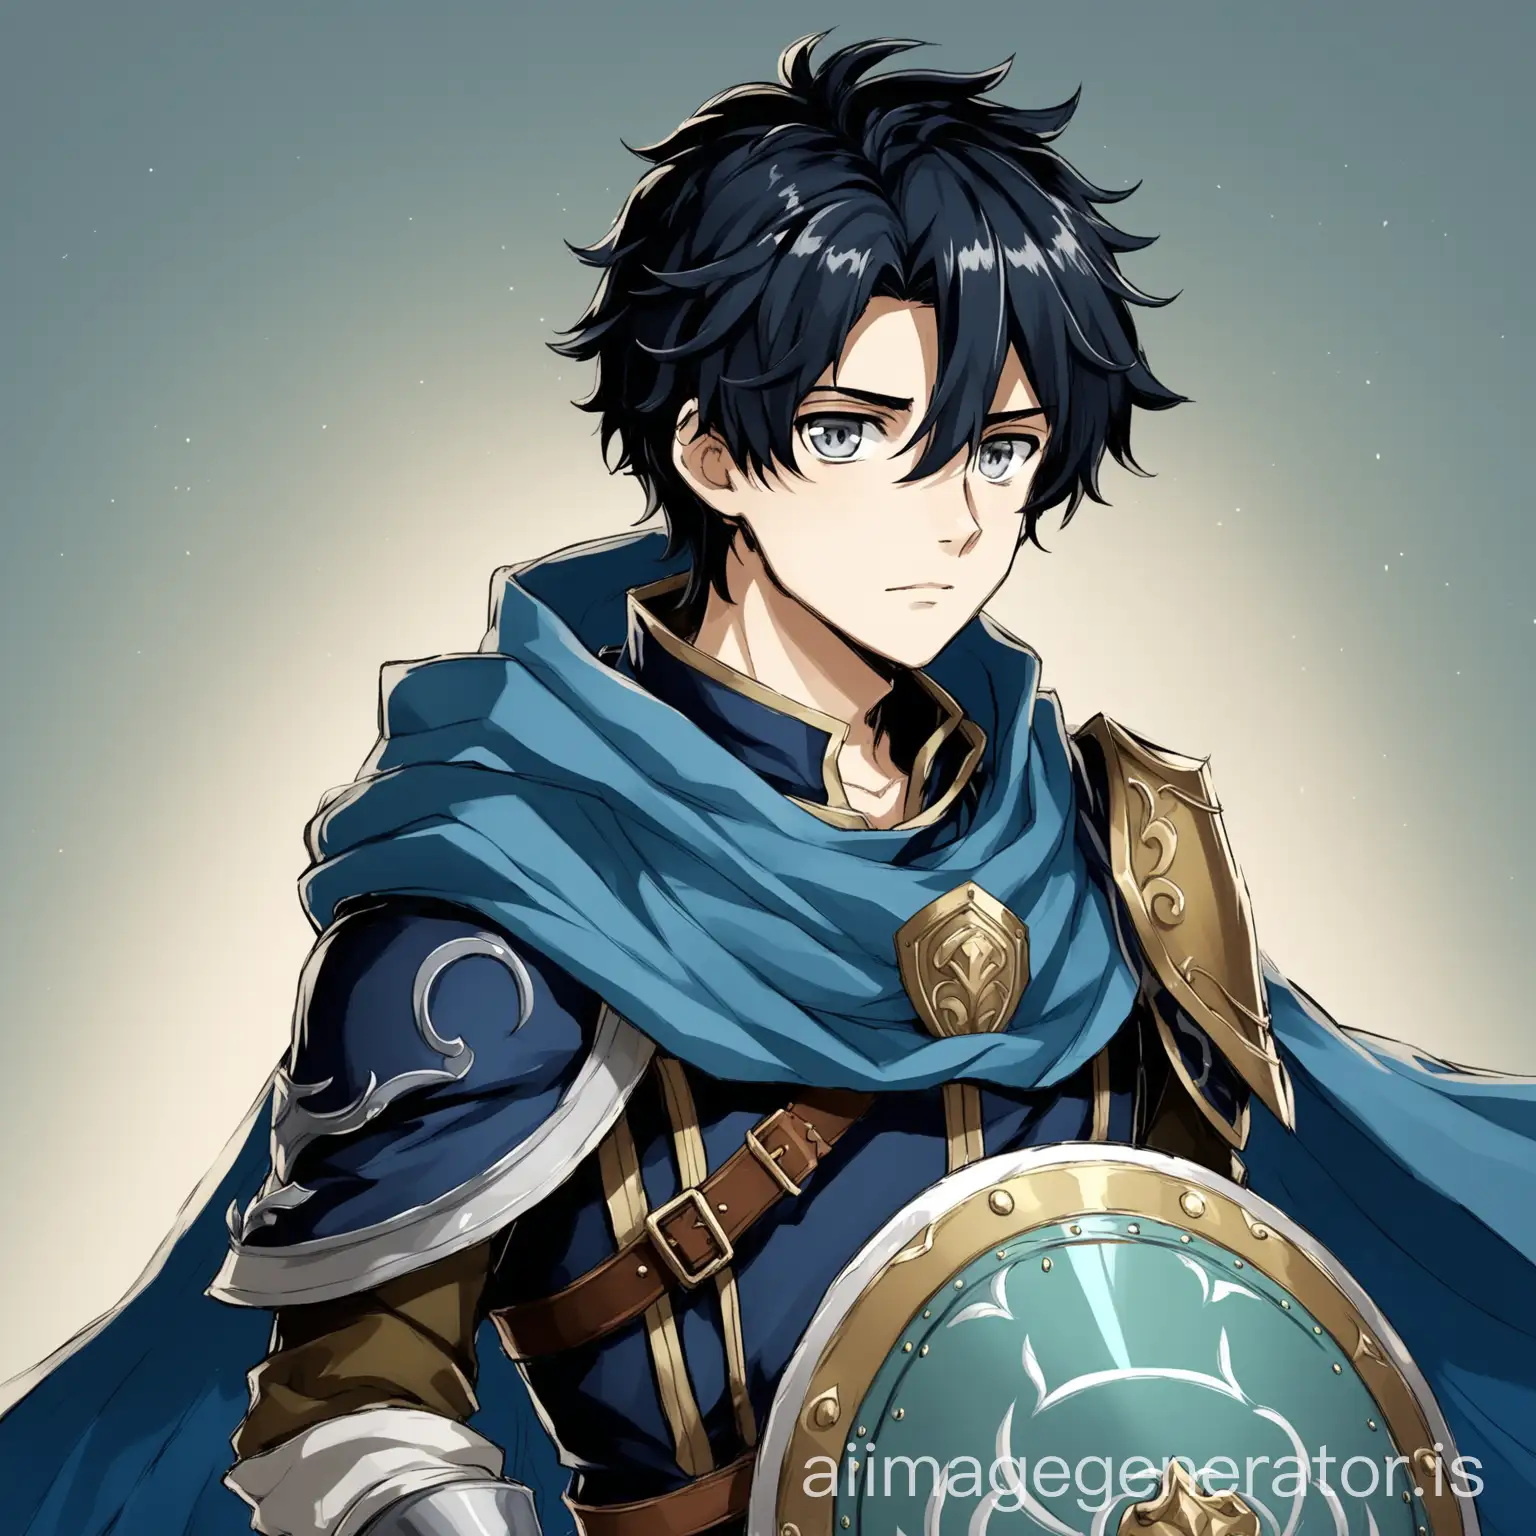 Handsome-Young-Male-with-Black-Hair-and-Blue-Cape-in-Shield-Hero-Stil